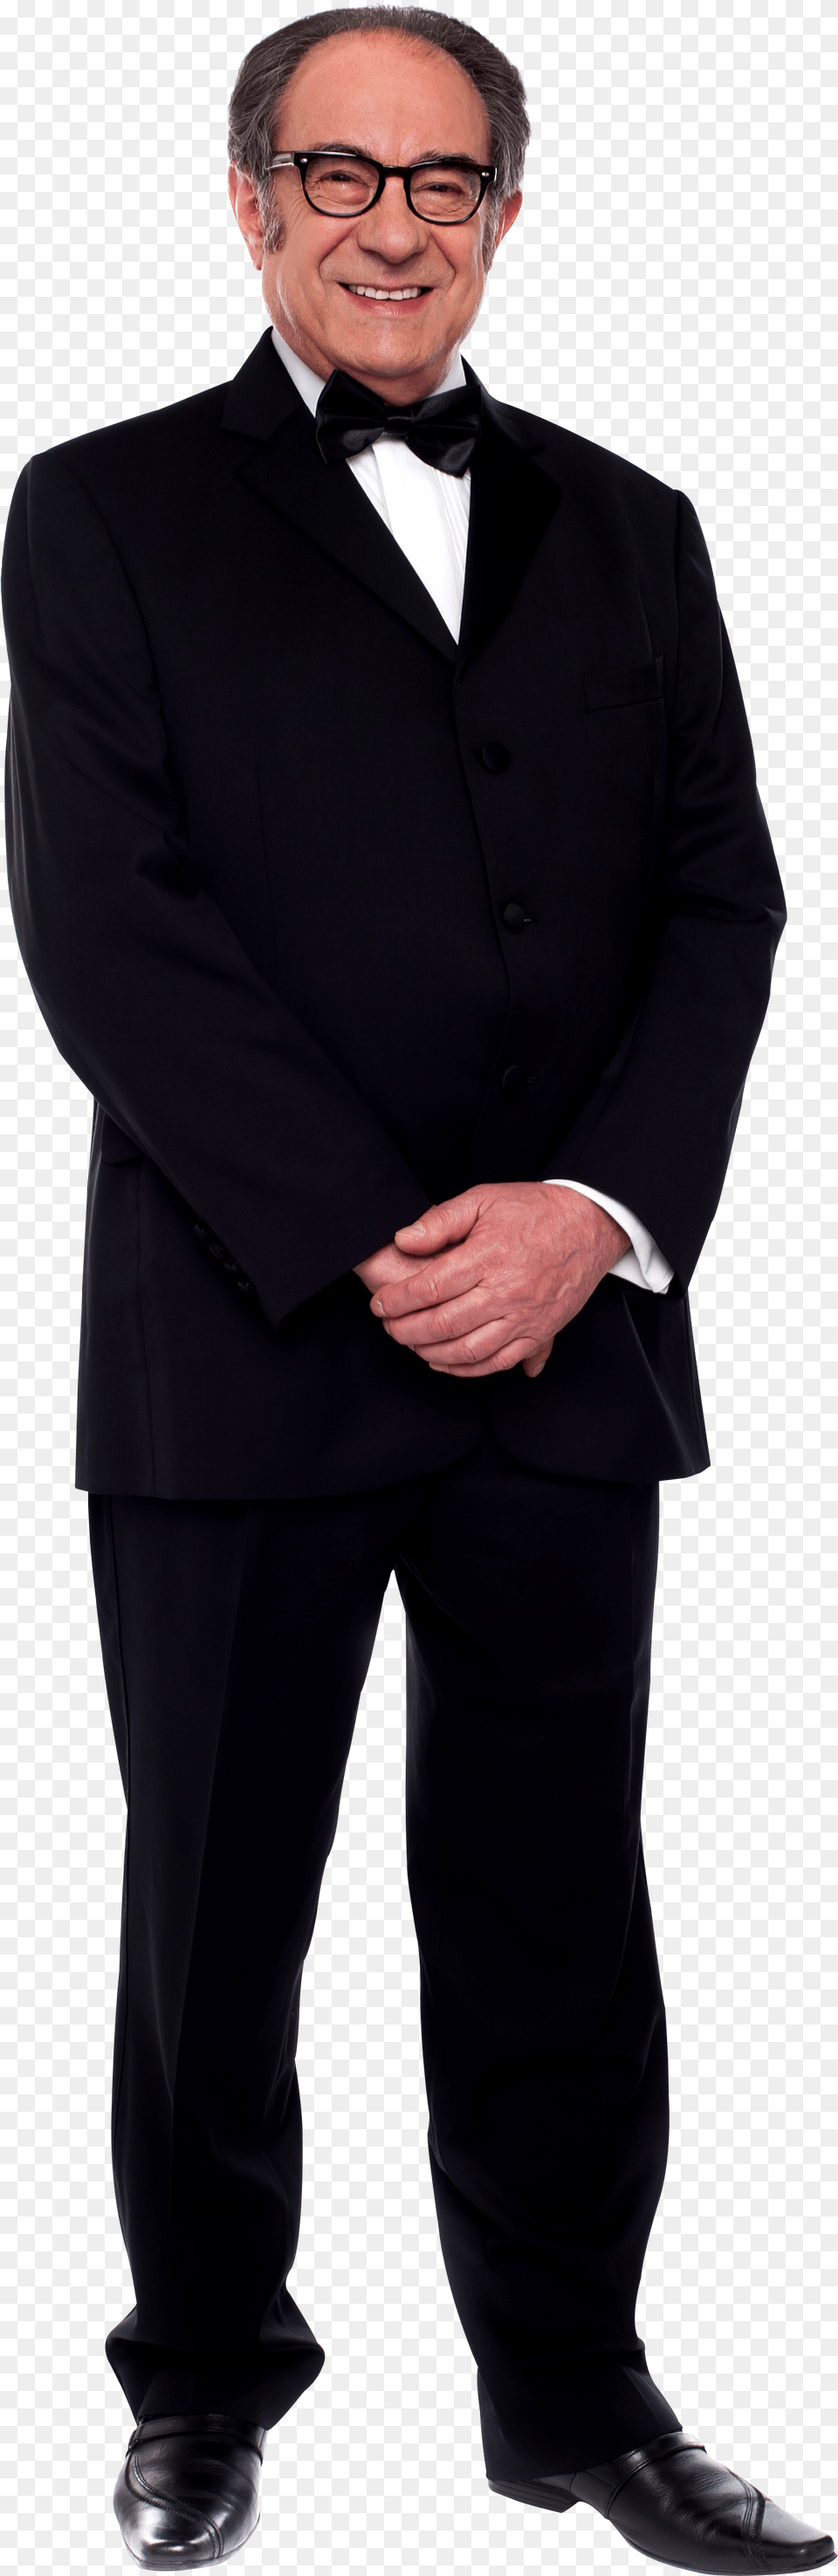 Grandfather Tuxedo For Older Man, Clothing, Suit, Formal Wear, Tie Free Png Download